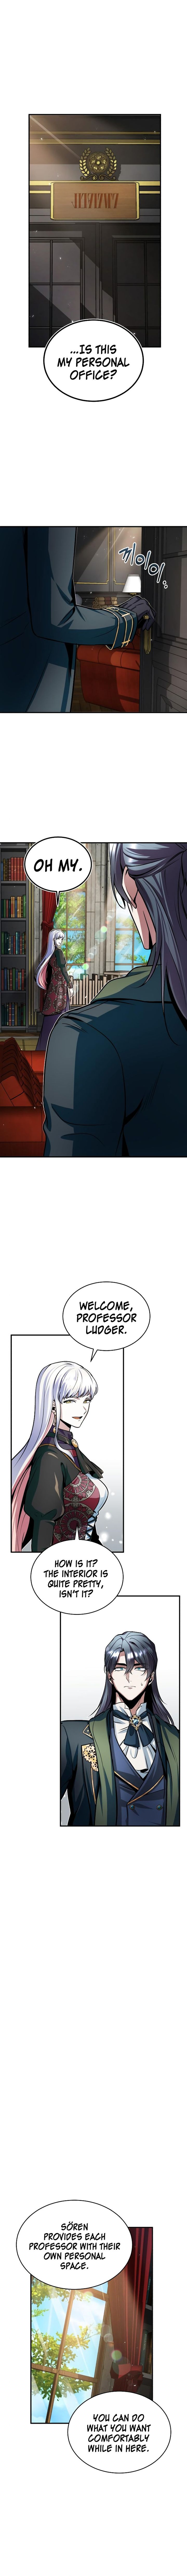 Academys Undercover Professor Chapter 8 Page 9